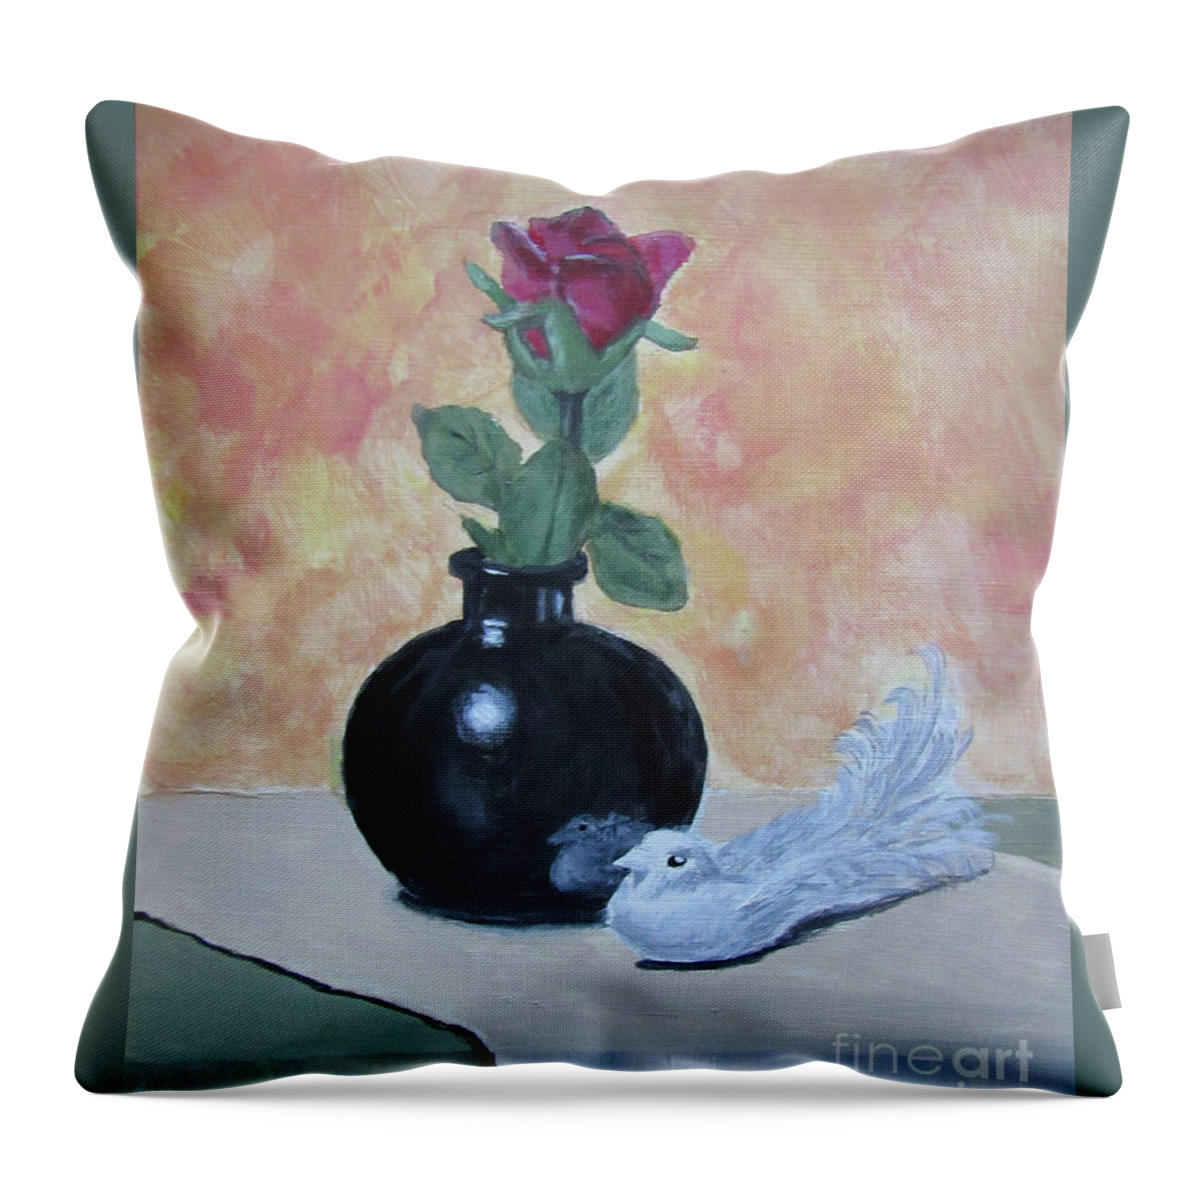 Still Life Throw Pillow featuring the painting Rose Vase Reflection by Tina Glass